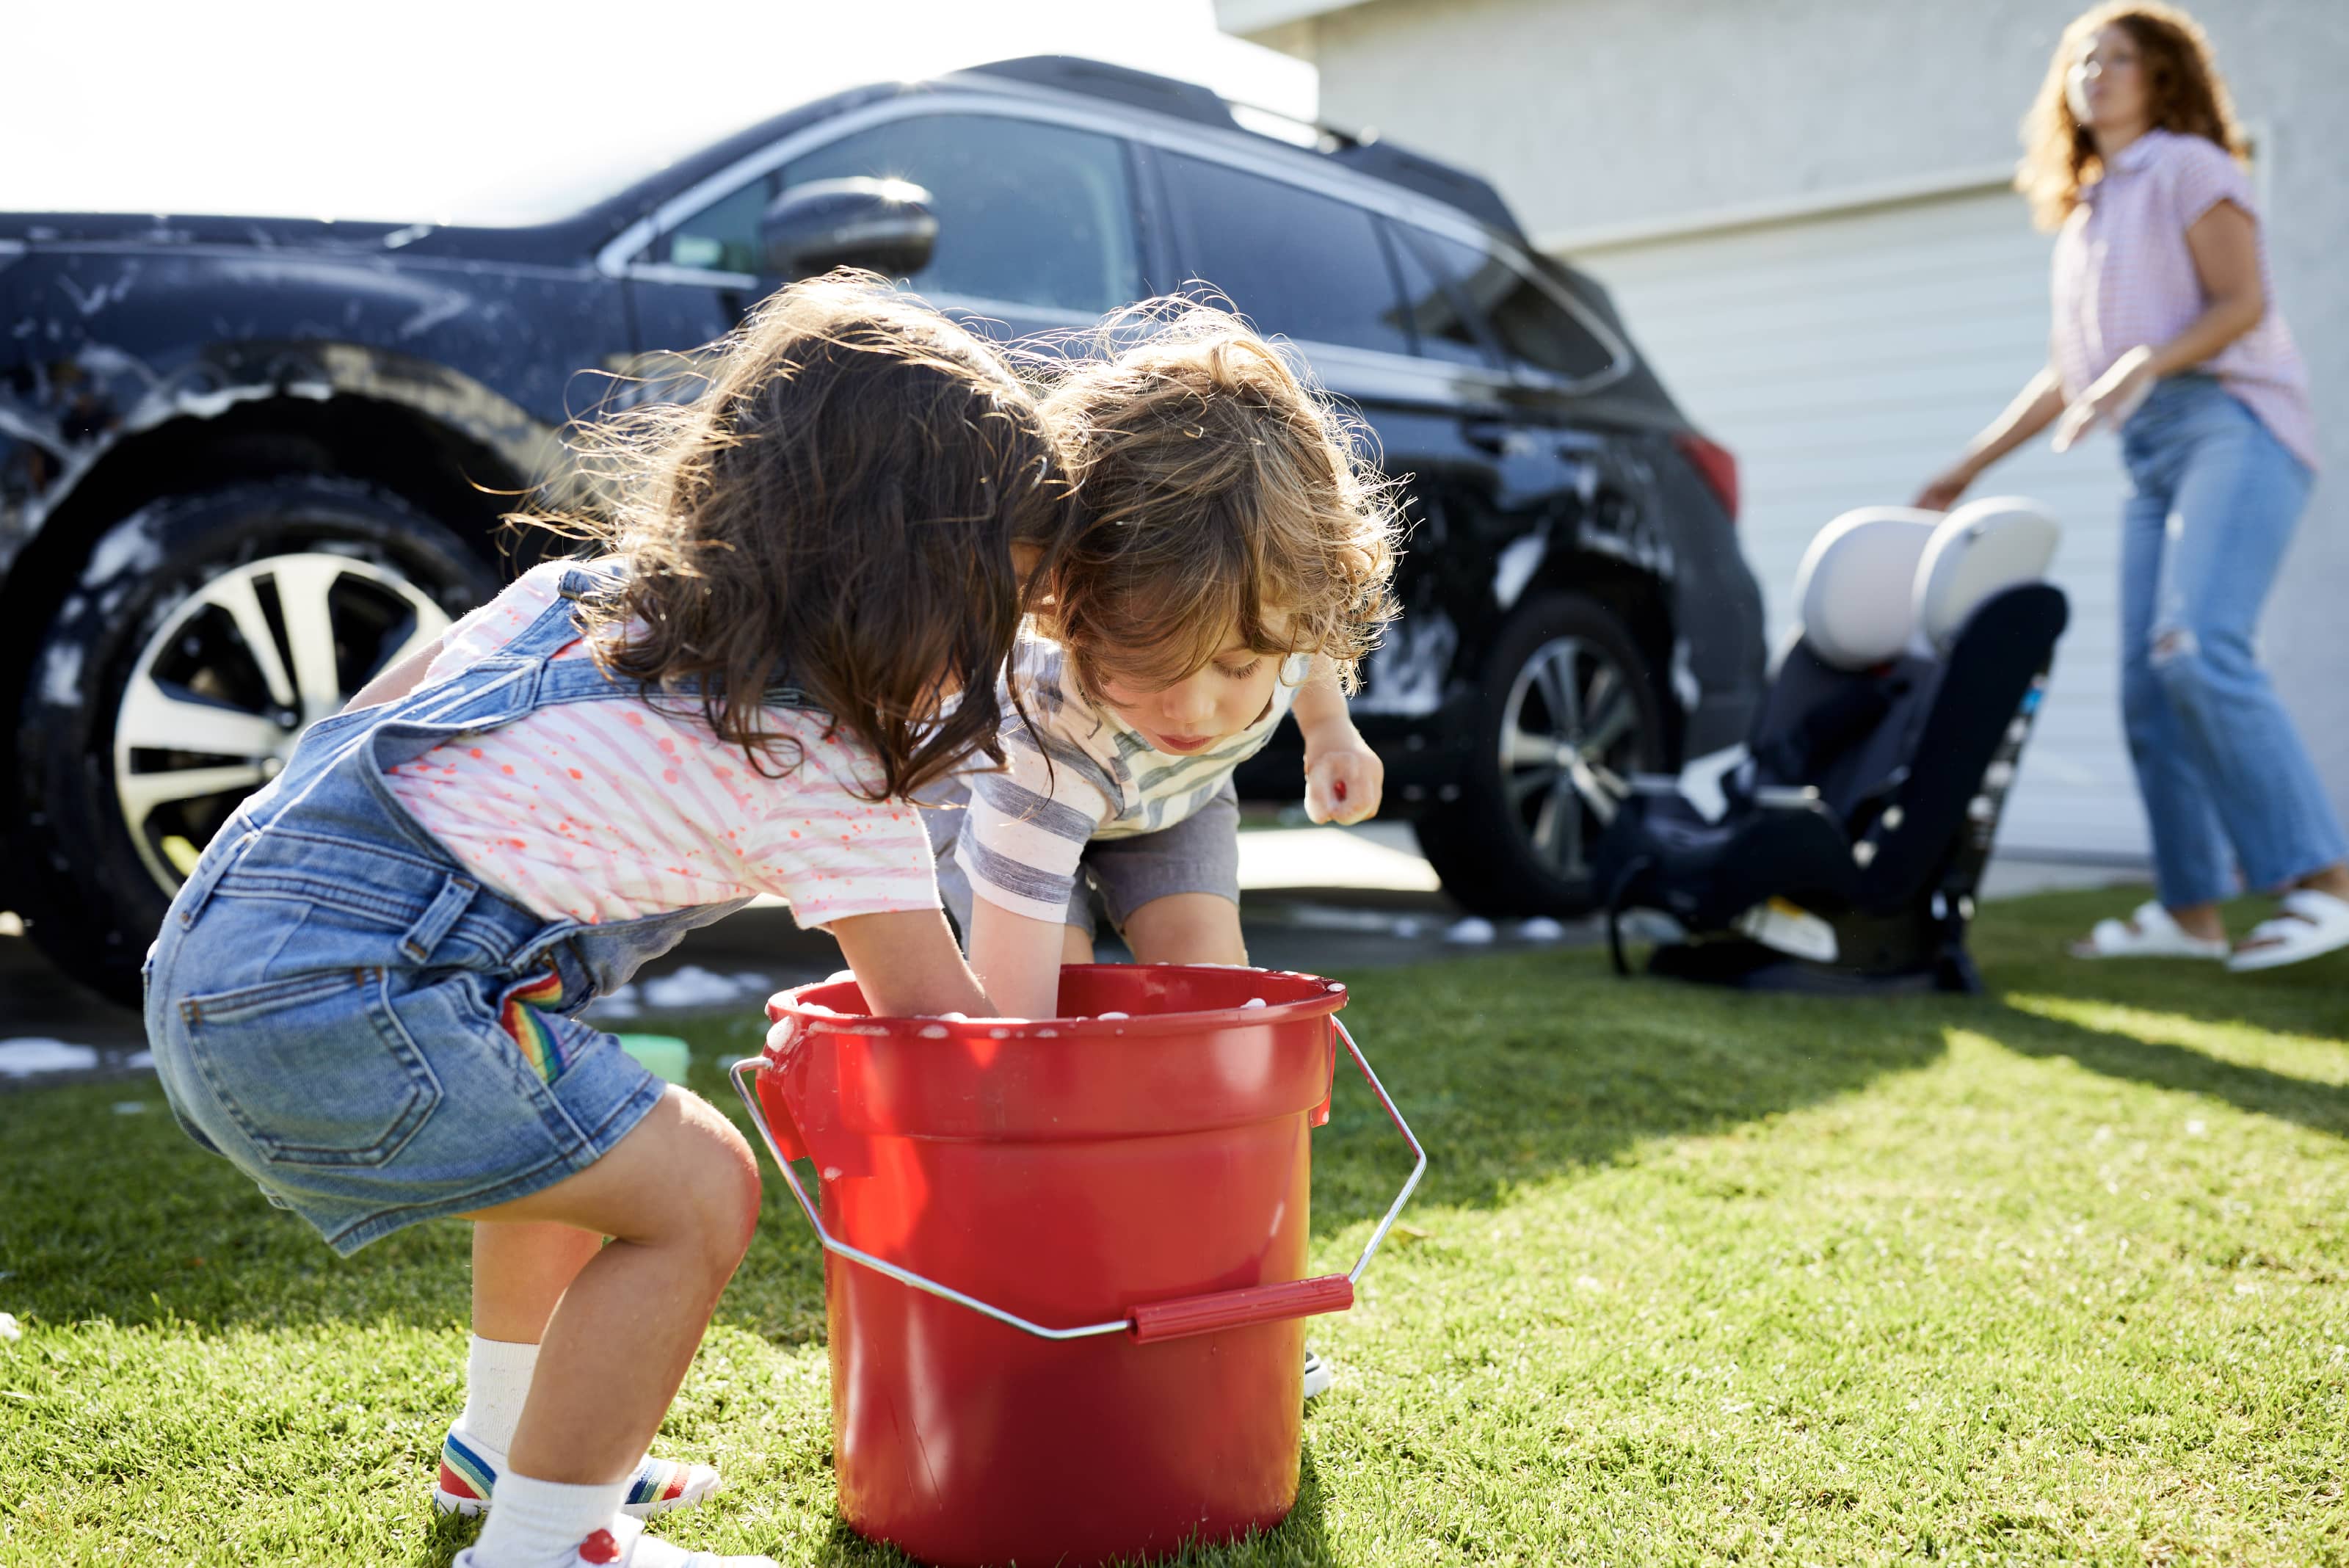 Two children reach into a bucket to continue washing a car. A woman moves a car seat.